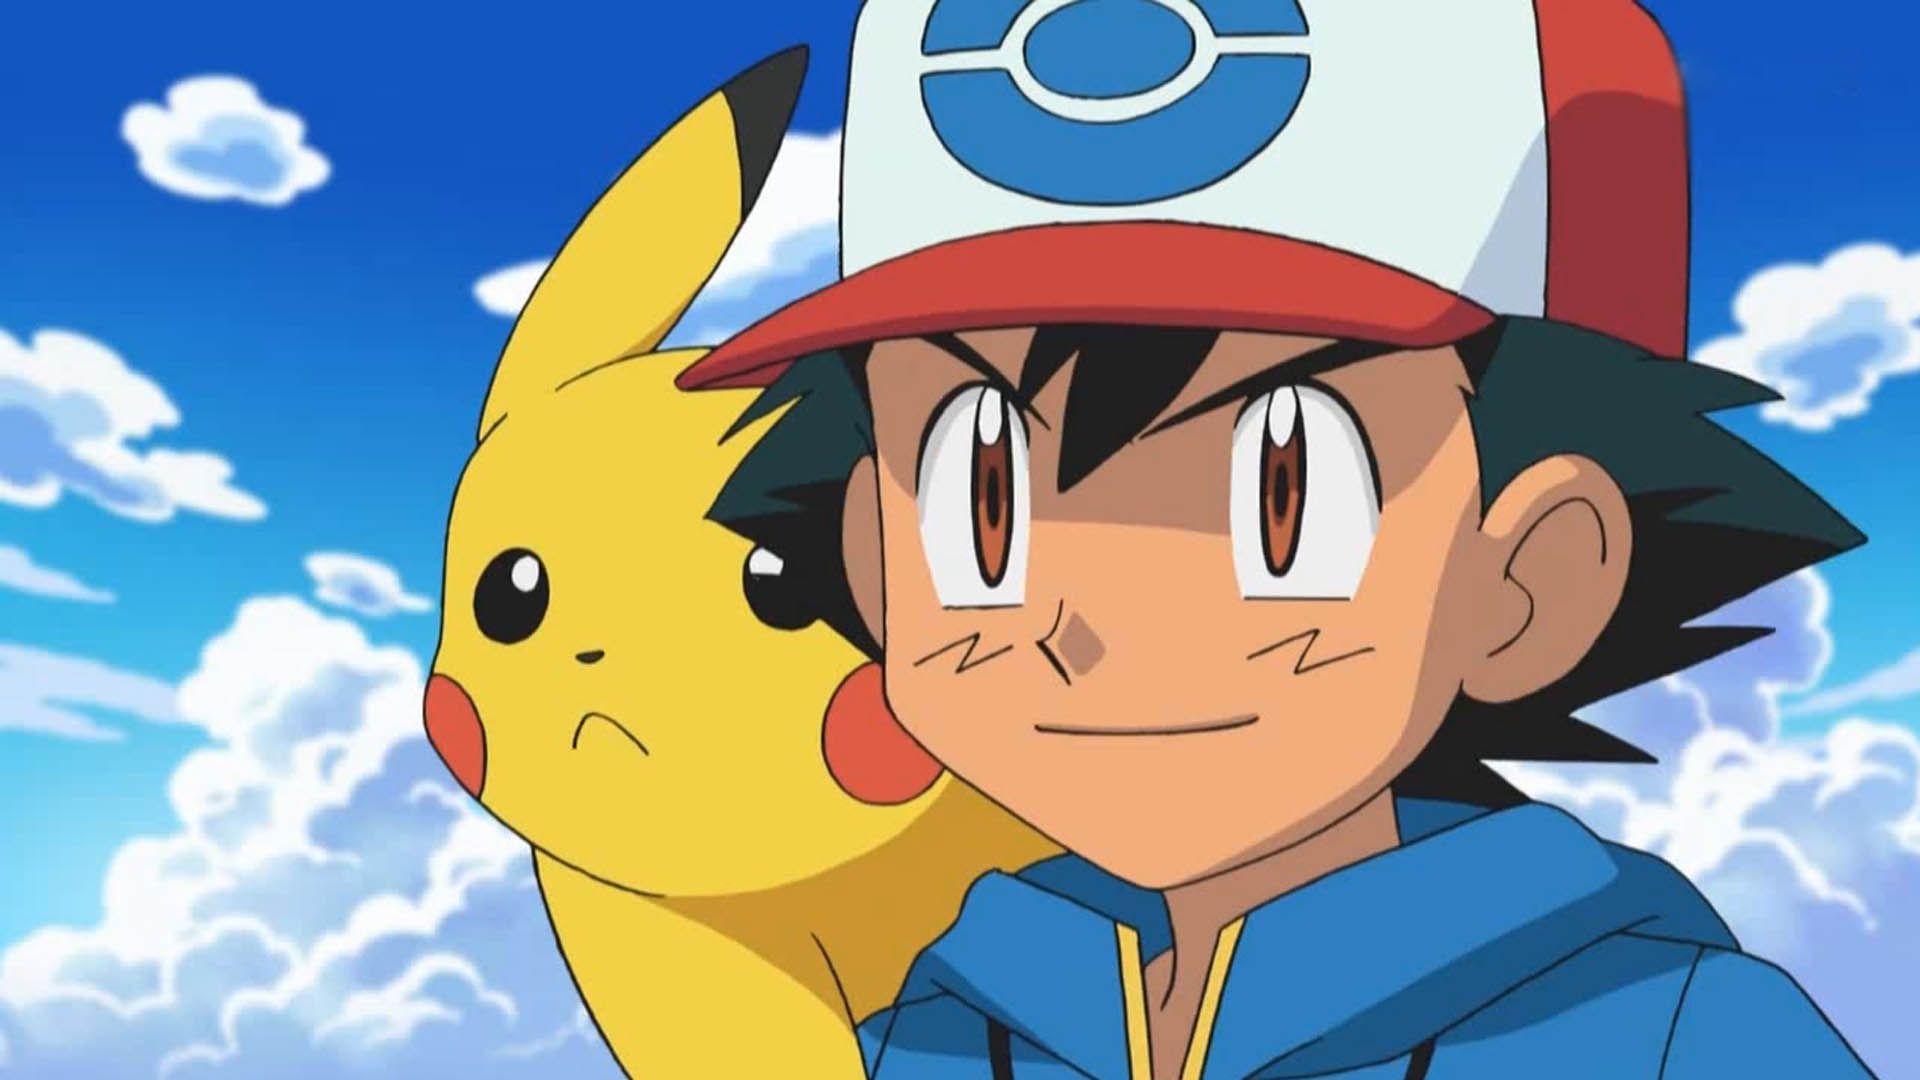 Weird things about Ash and Pikachu's relationship